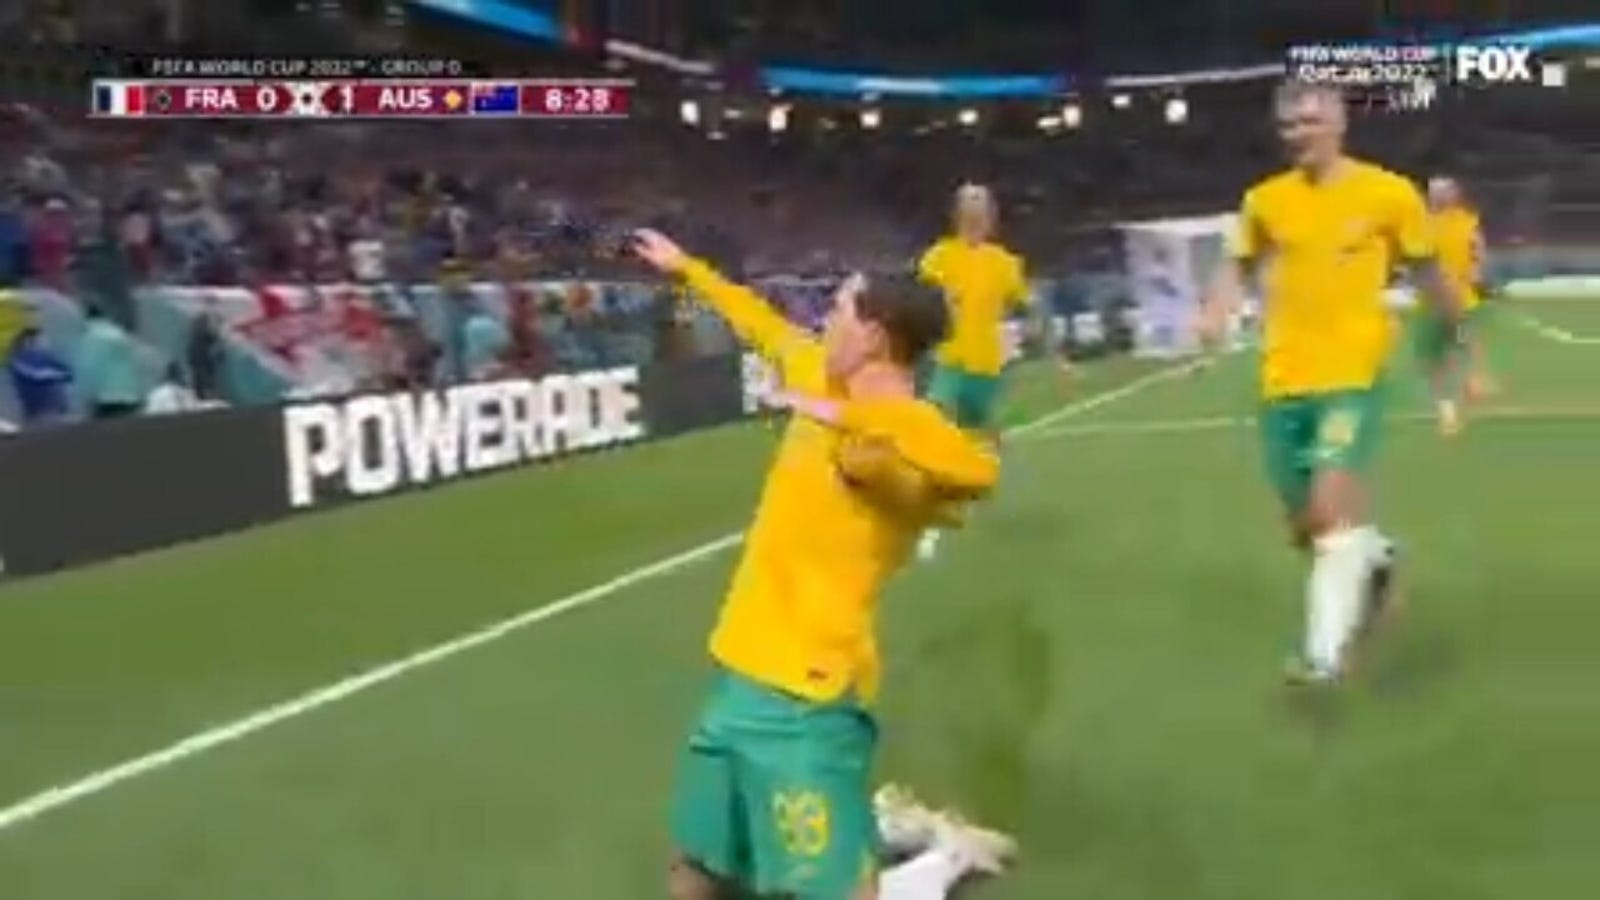 Craig Goodwin scored first in the 9th minute to give Australia a 1-0 lead 